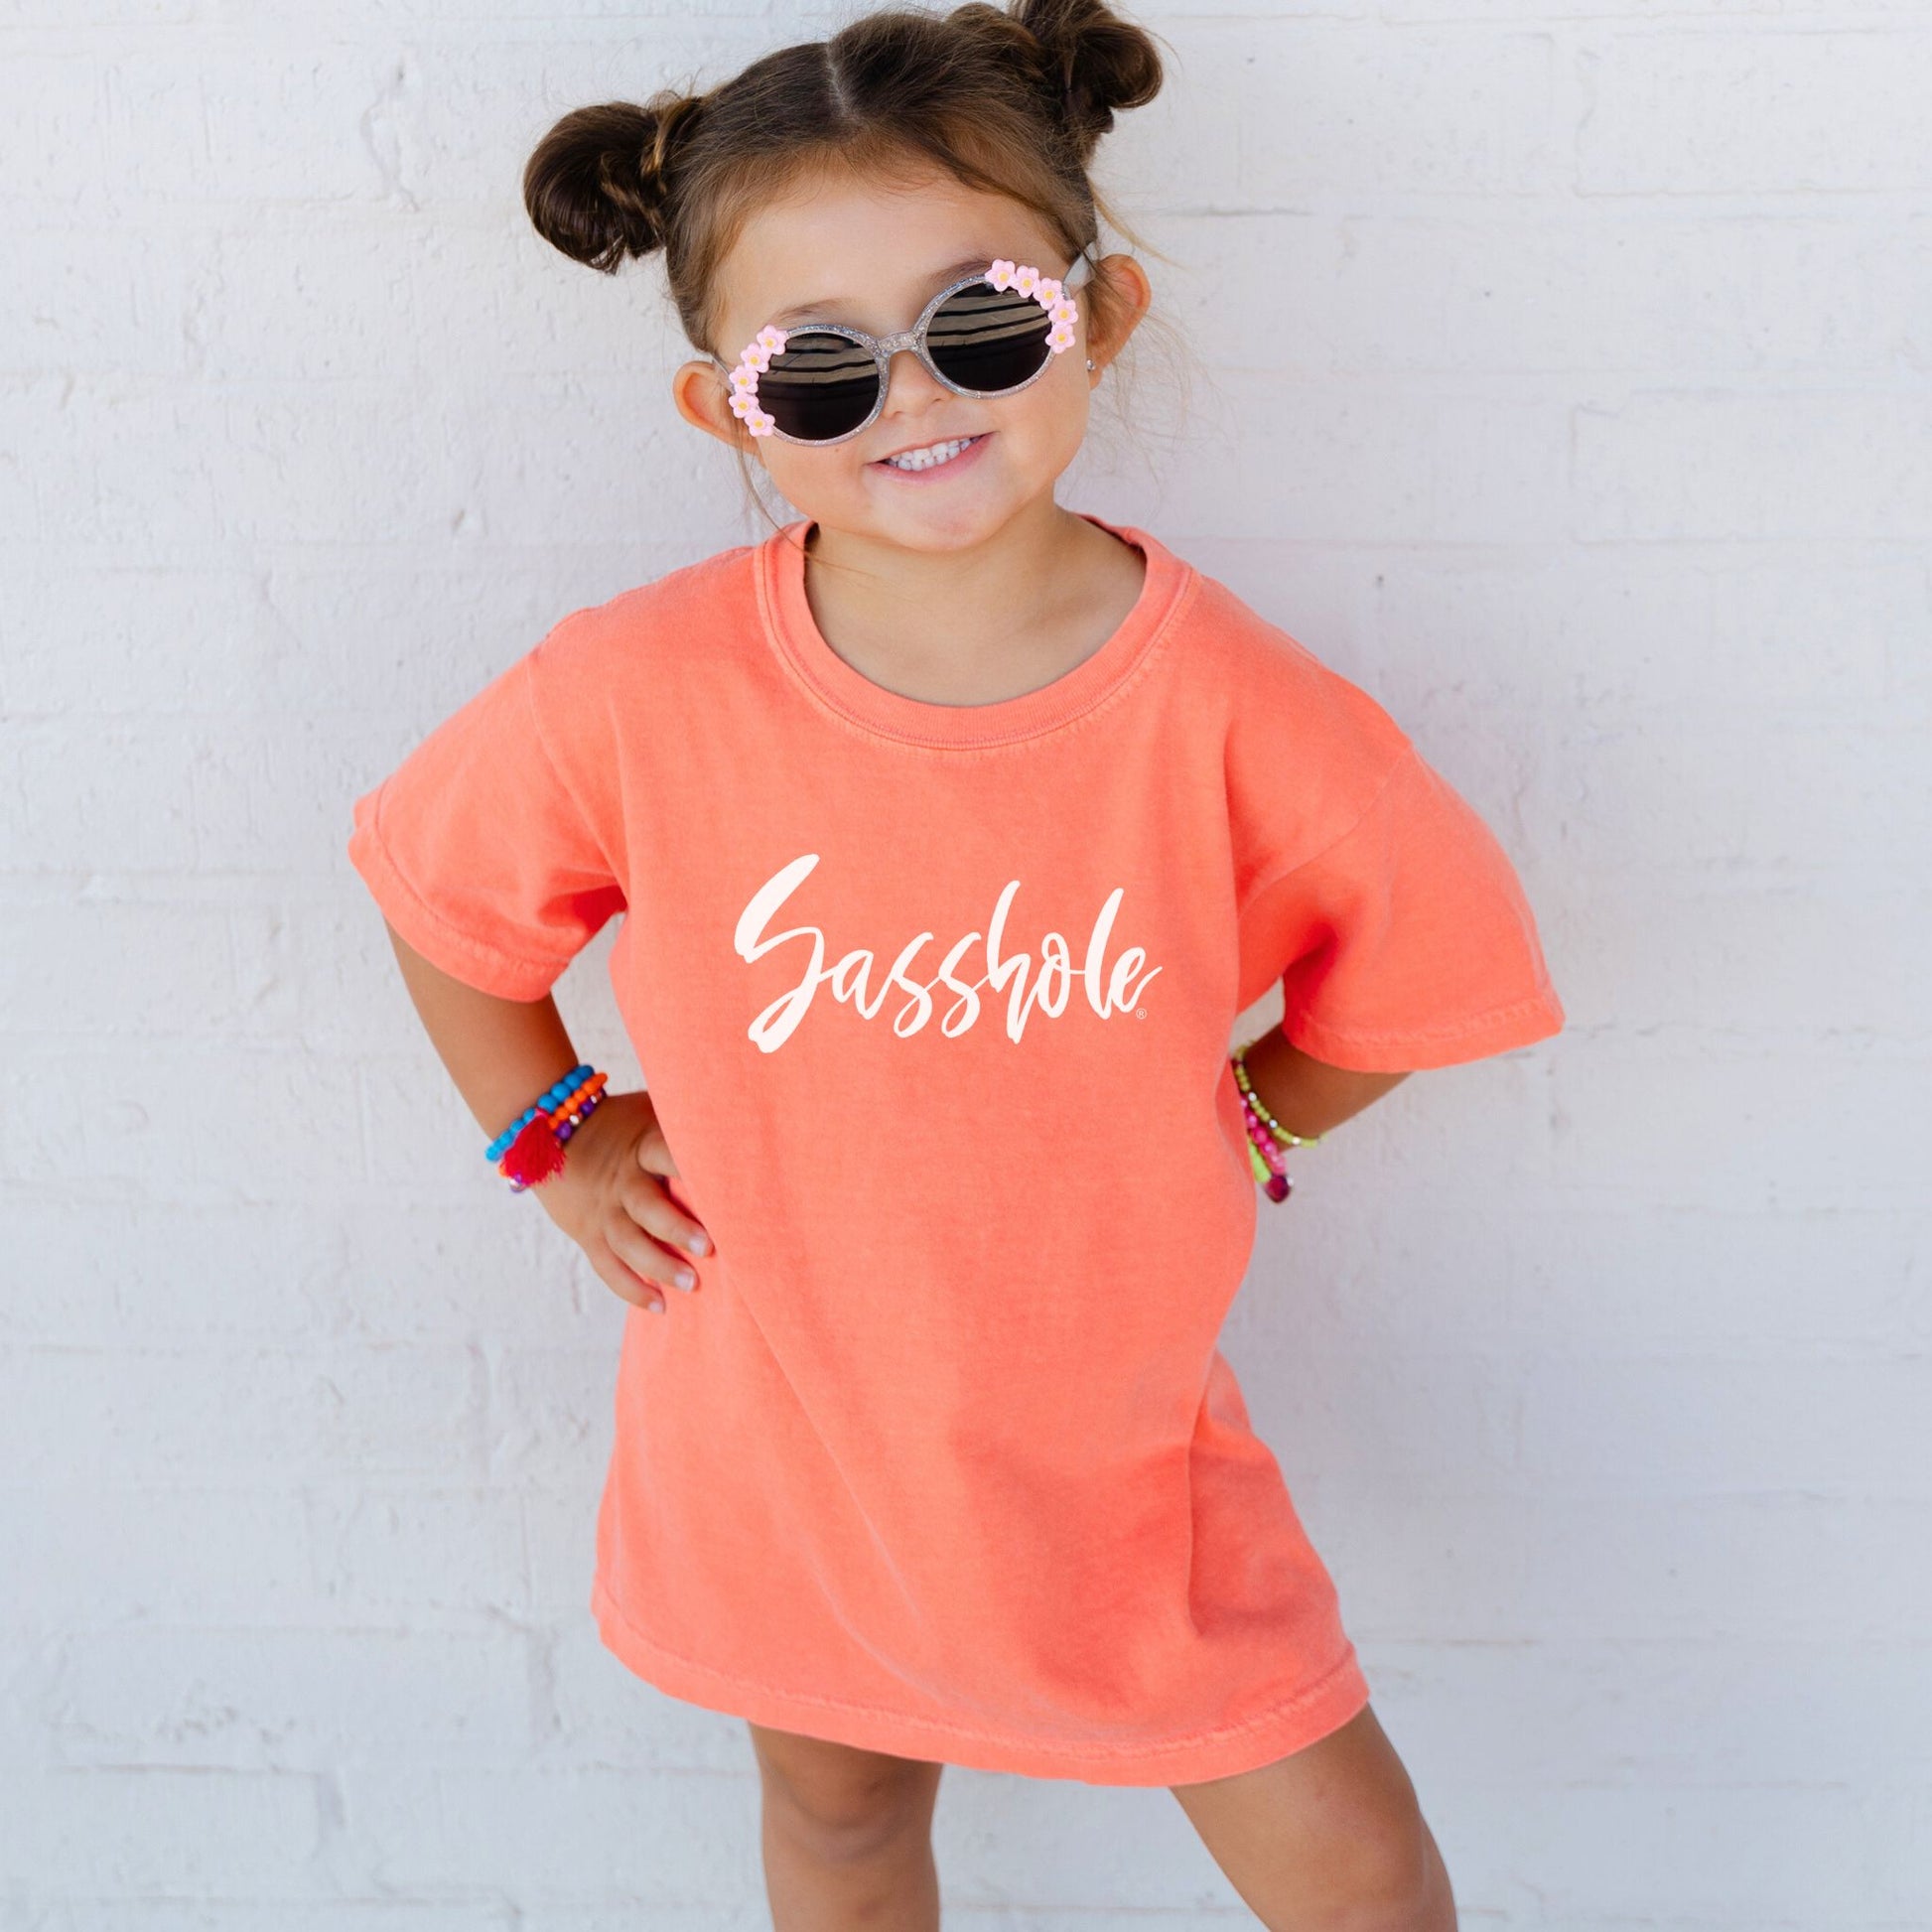 youth girls t-shirt, youth girl casual wear, youth clothing variety, youth clothing essentials, whimsical graphic design, vibrant youth styles, vibrant youth apparel, Unisex, unique kids clothing, unique graphic print style, trendy graphic print fashion, trendy children's apparel, toddler girl statement tee, T-shirts, stylish toddler outfit, stylish graphic tee for girls, statement tee for girls, sassy youth fashion, sassy slogan tee, Regular fit